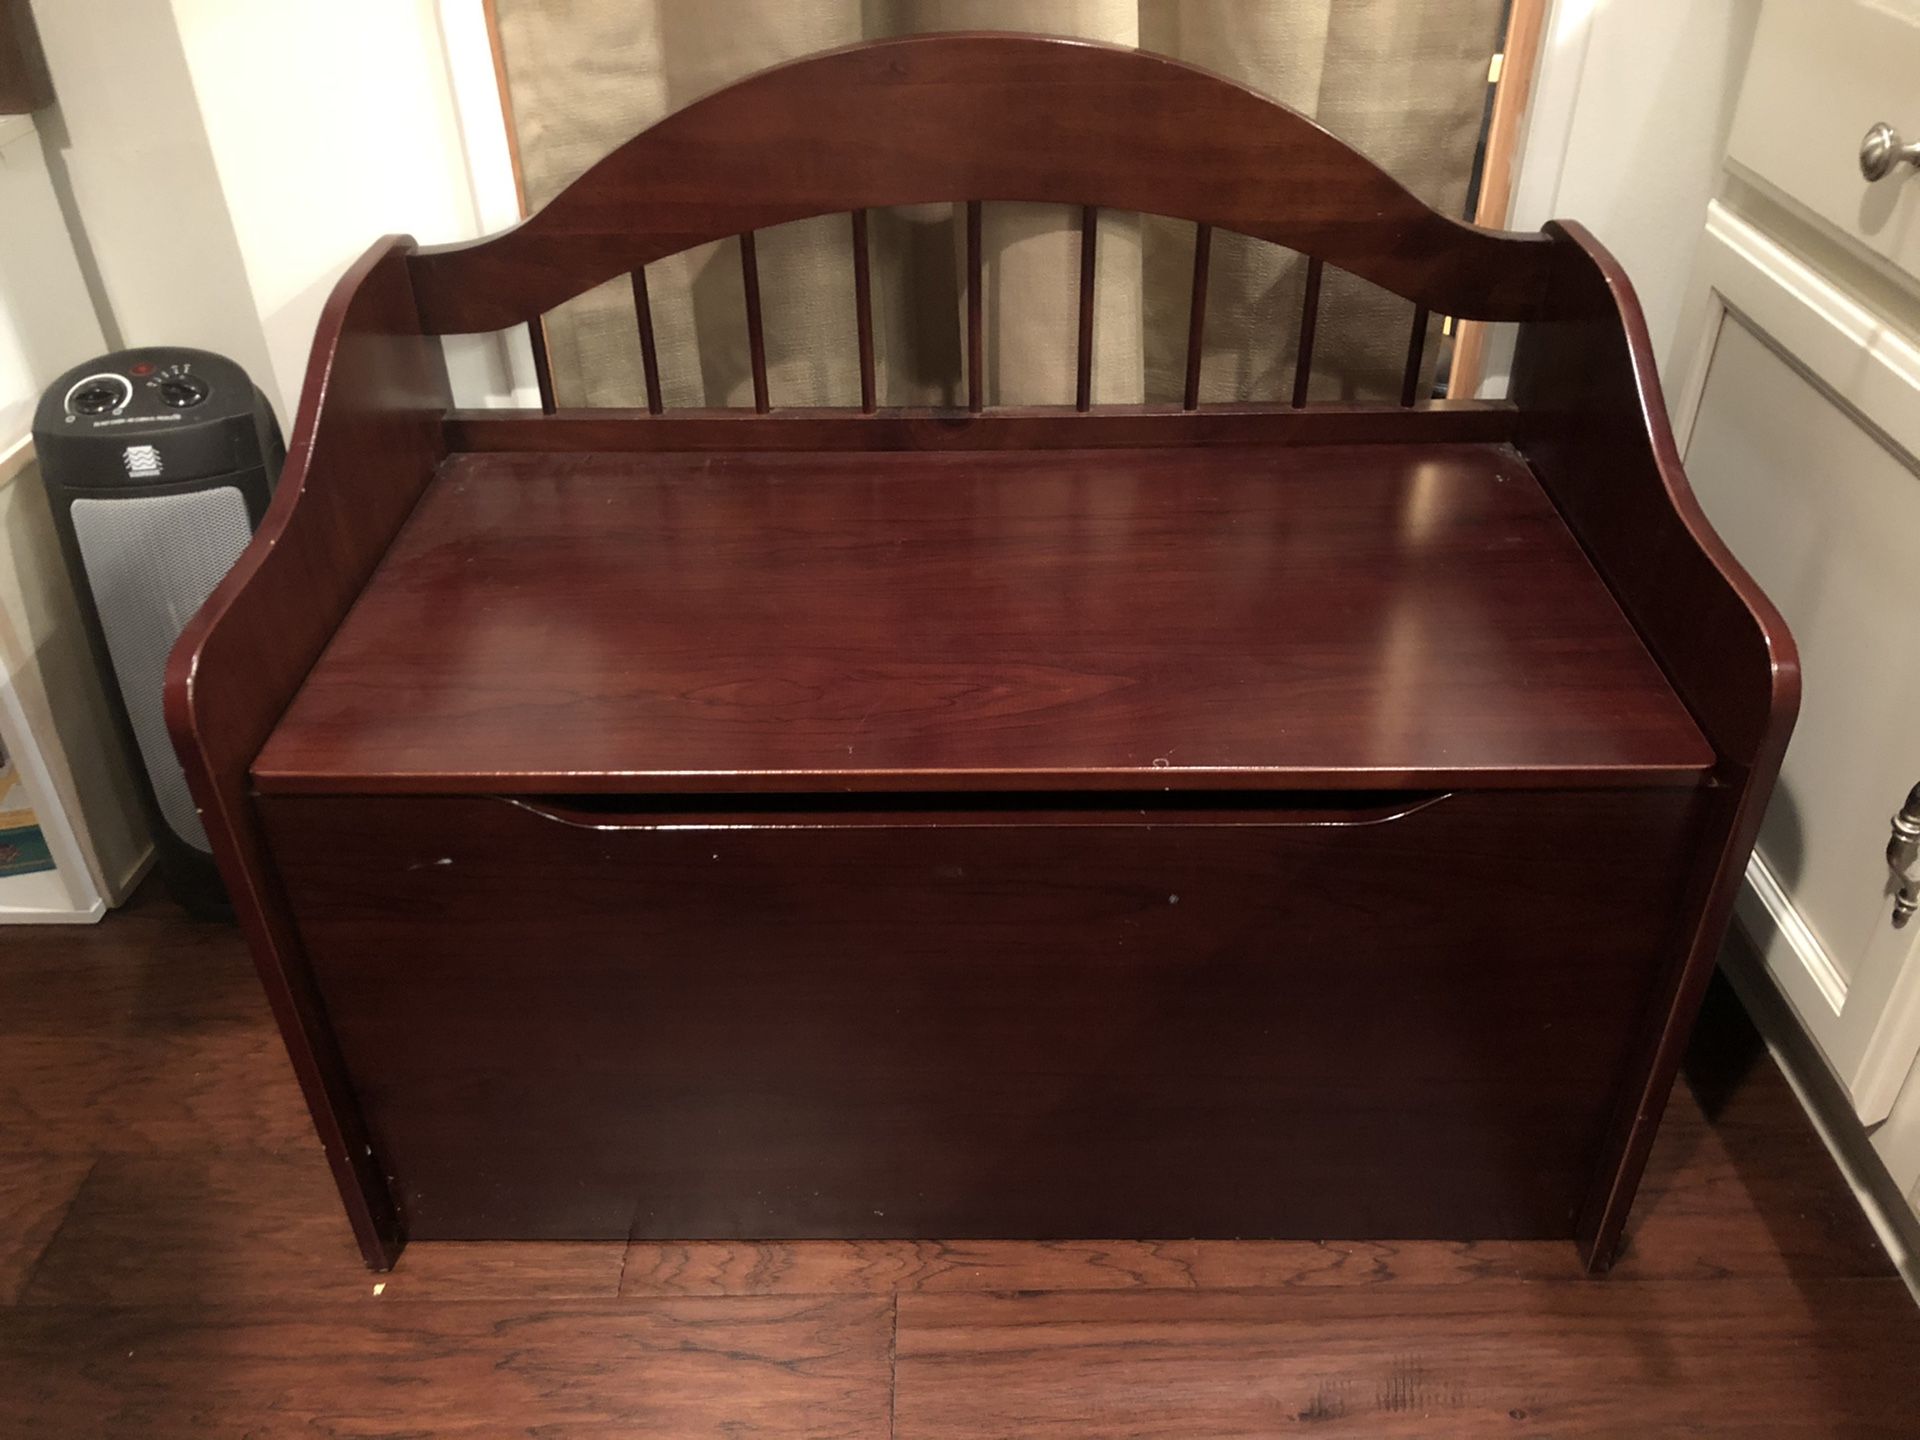 Wooden toy chest/bench with safety hinge